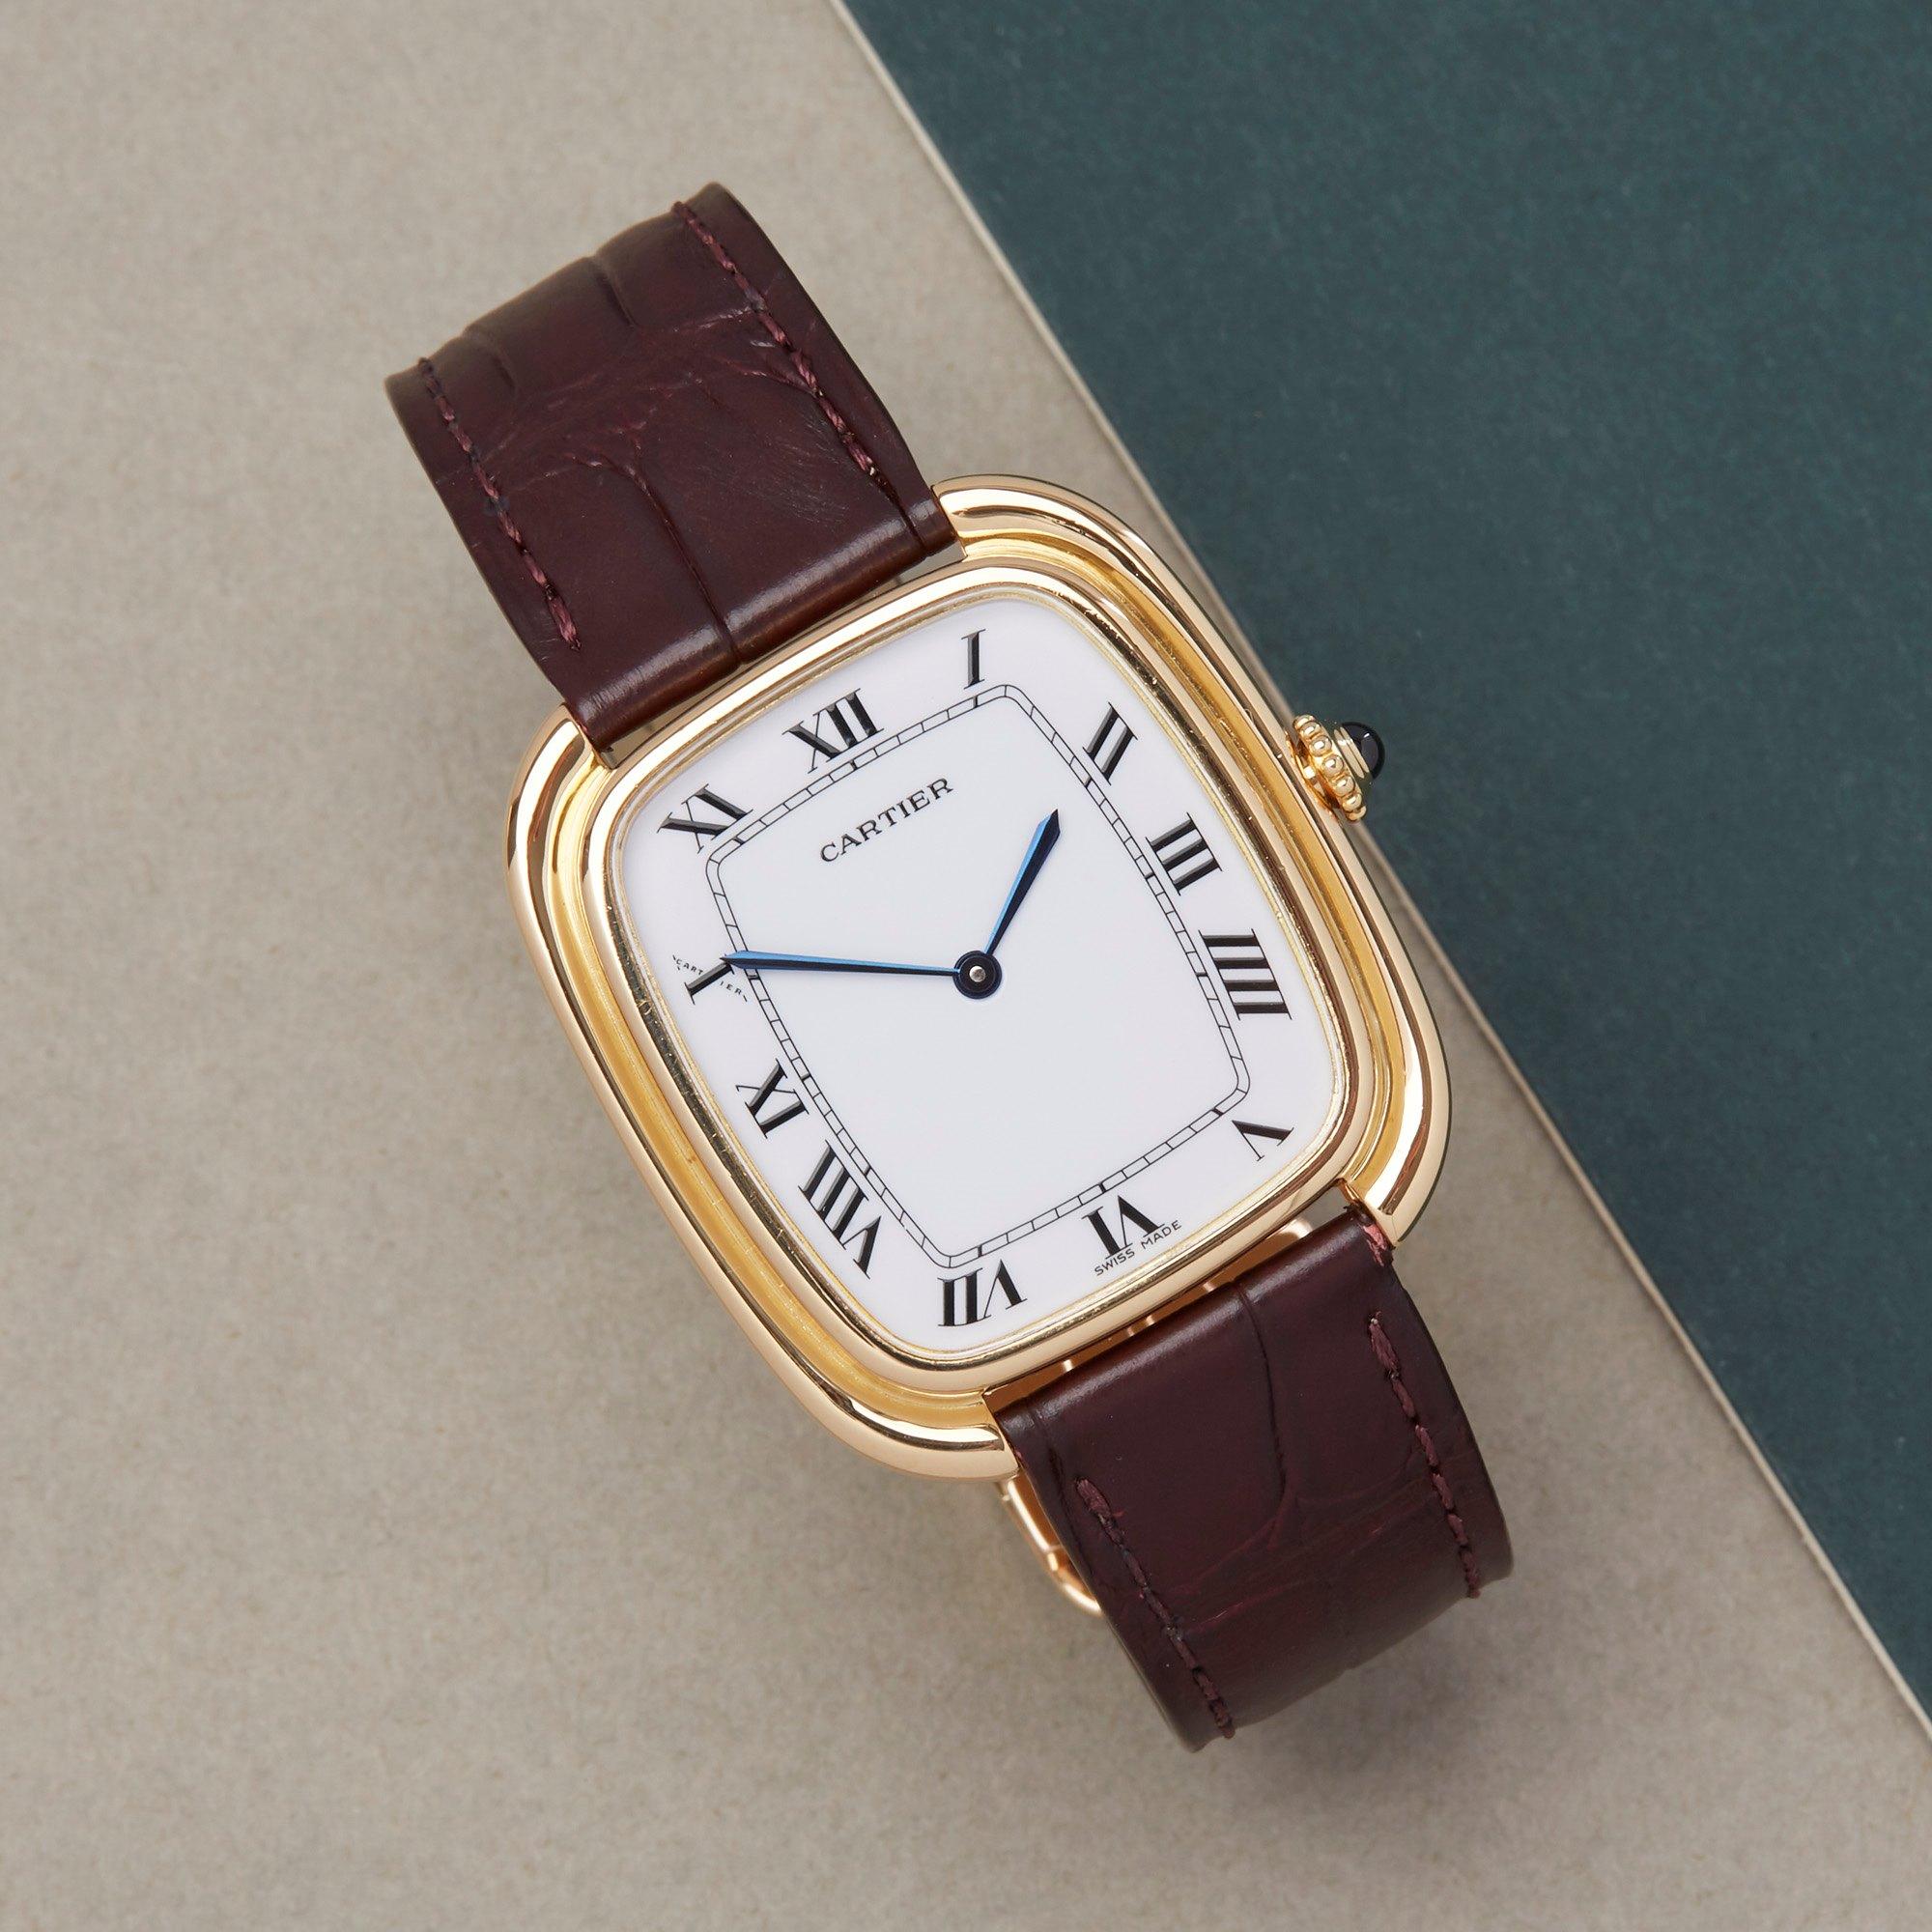 Xupes Reference: W007859
Manufacturer: Cartier
Model: Gondole Jumbo 
Model Variant: Paris
Model Number: 81720400
Age: 1980
Gender: Men
Complete With: Cartier Box & Service Warranty Card Dated 4th July 2019
Dial: White Roman
Glass: Sapphire